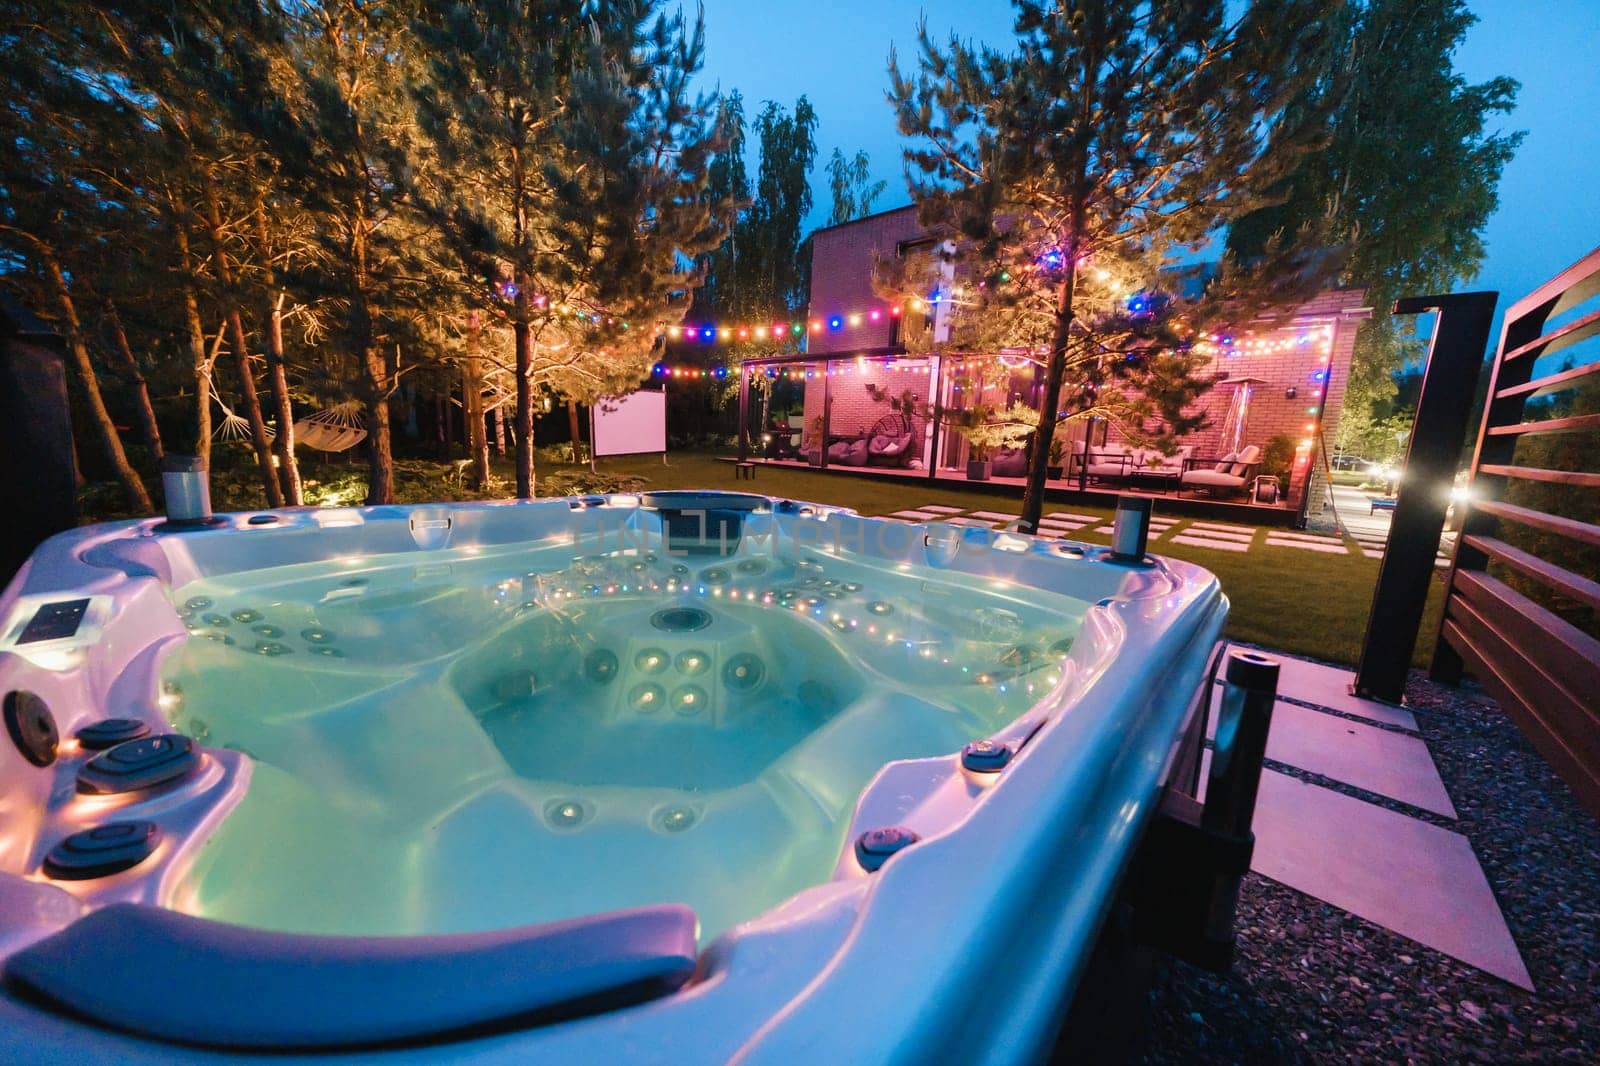 self-contained hot tub or pool with hot water and evening lighting.